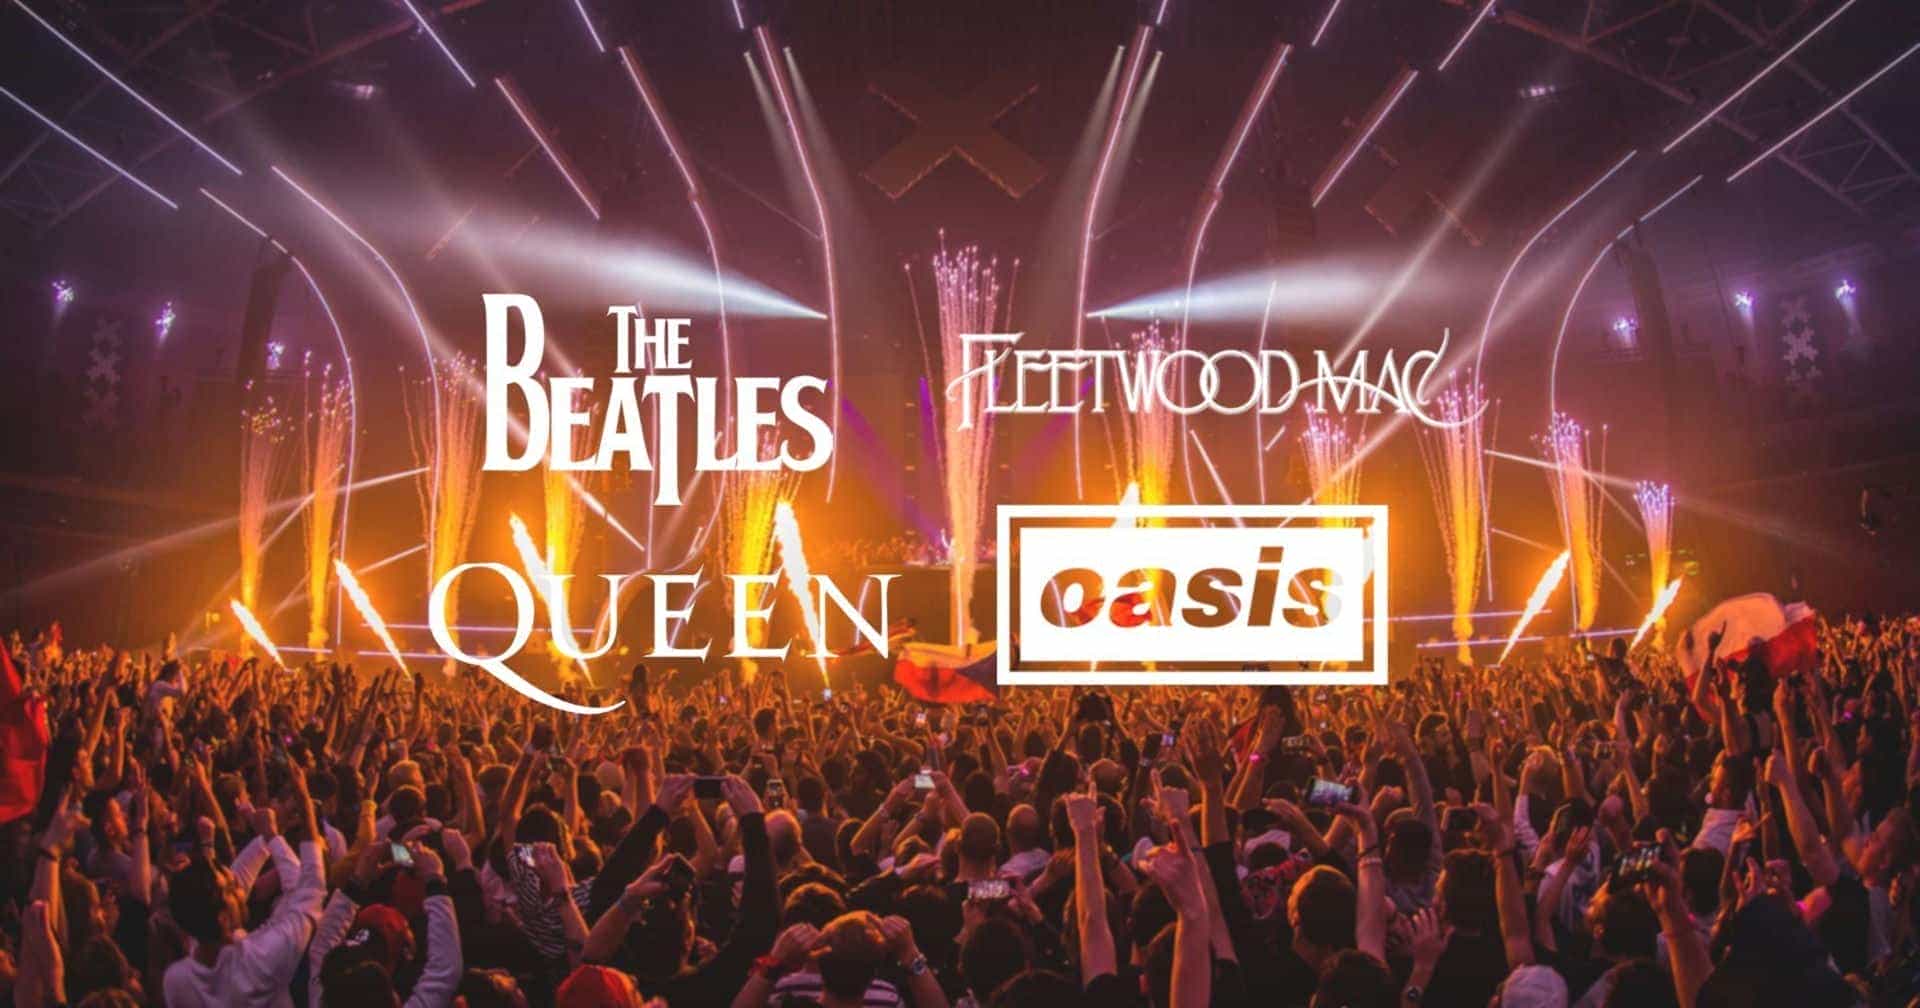 Tributes to Queen, Oasis, The Beatles and Fleetwood Mac